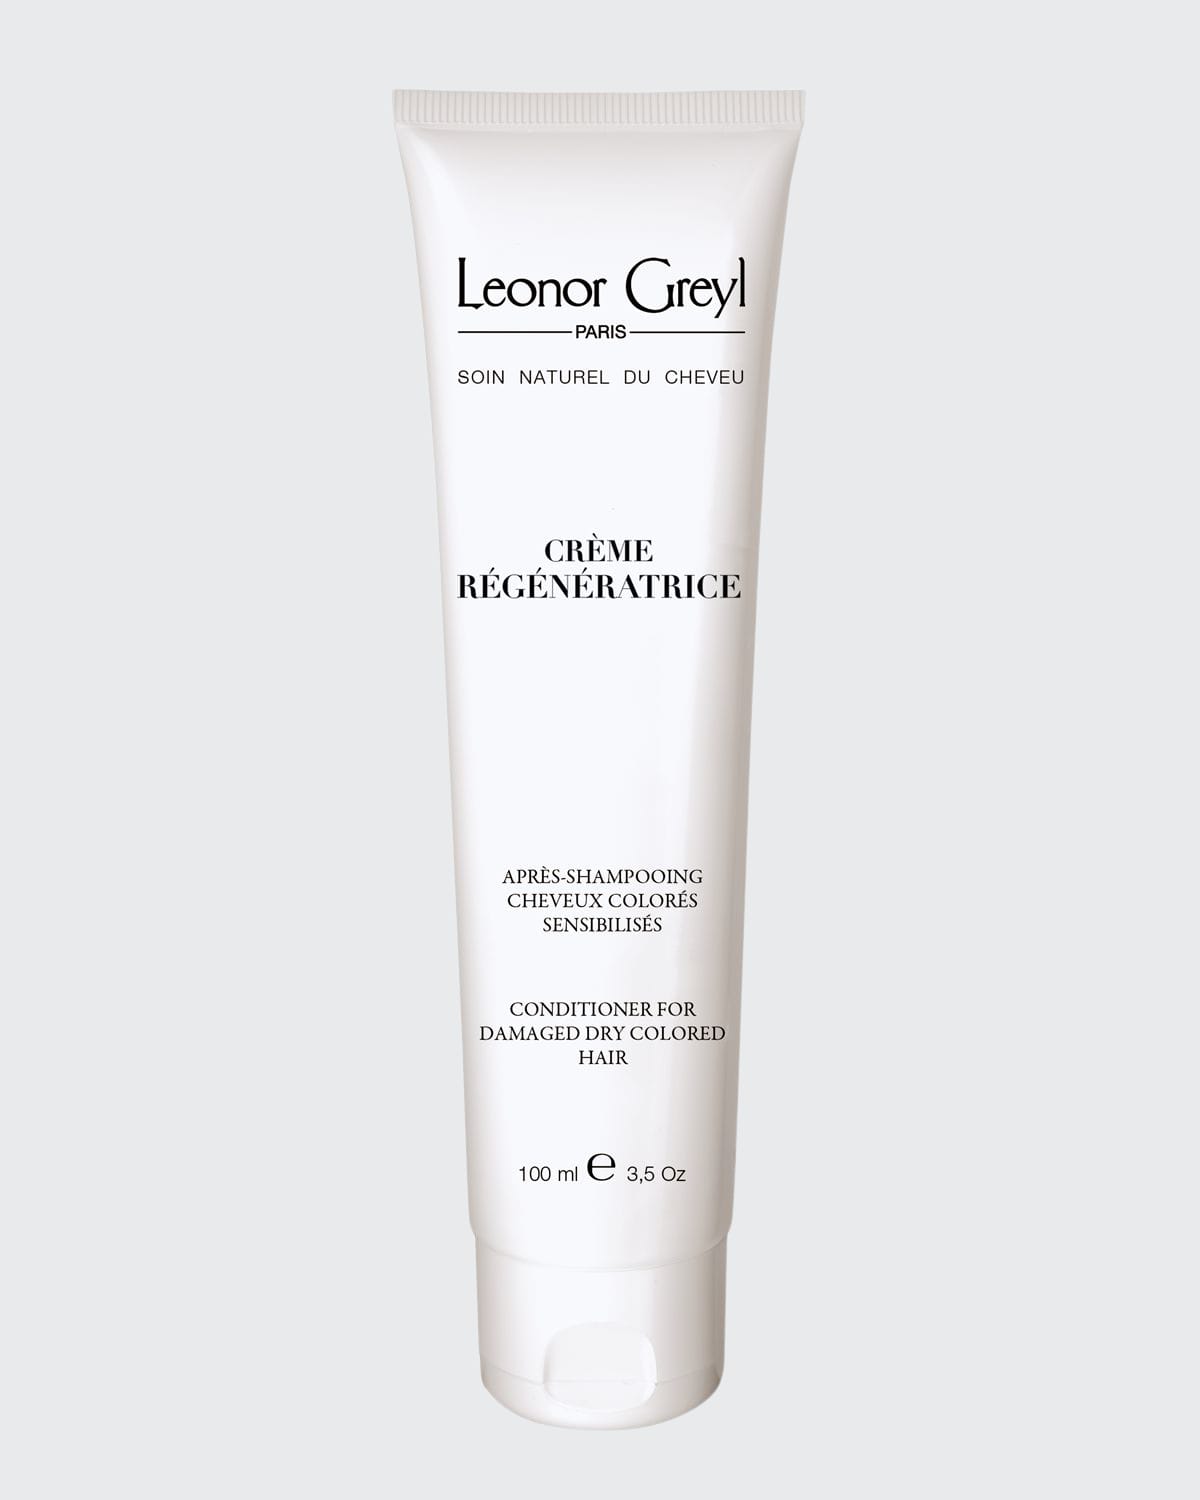 Leonor Greyl Cr&#232me Regeneratrice (Conditioner for Damaged, Dry, Colored Hair), 3.5 oz./ 100 mL